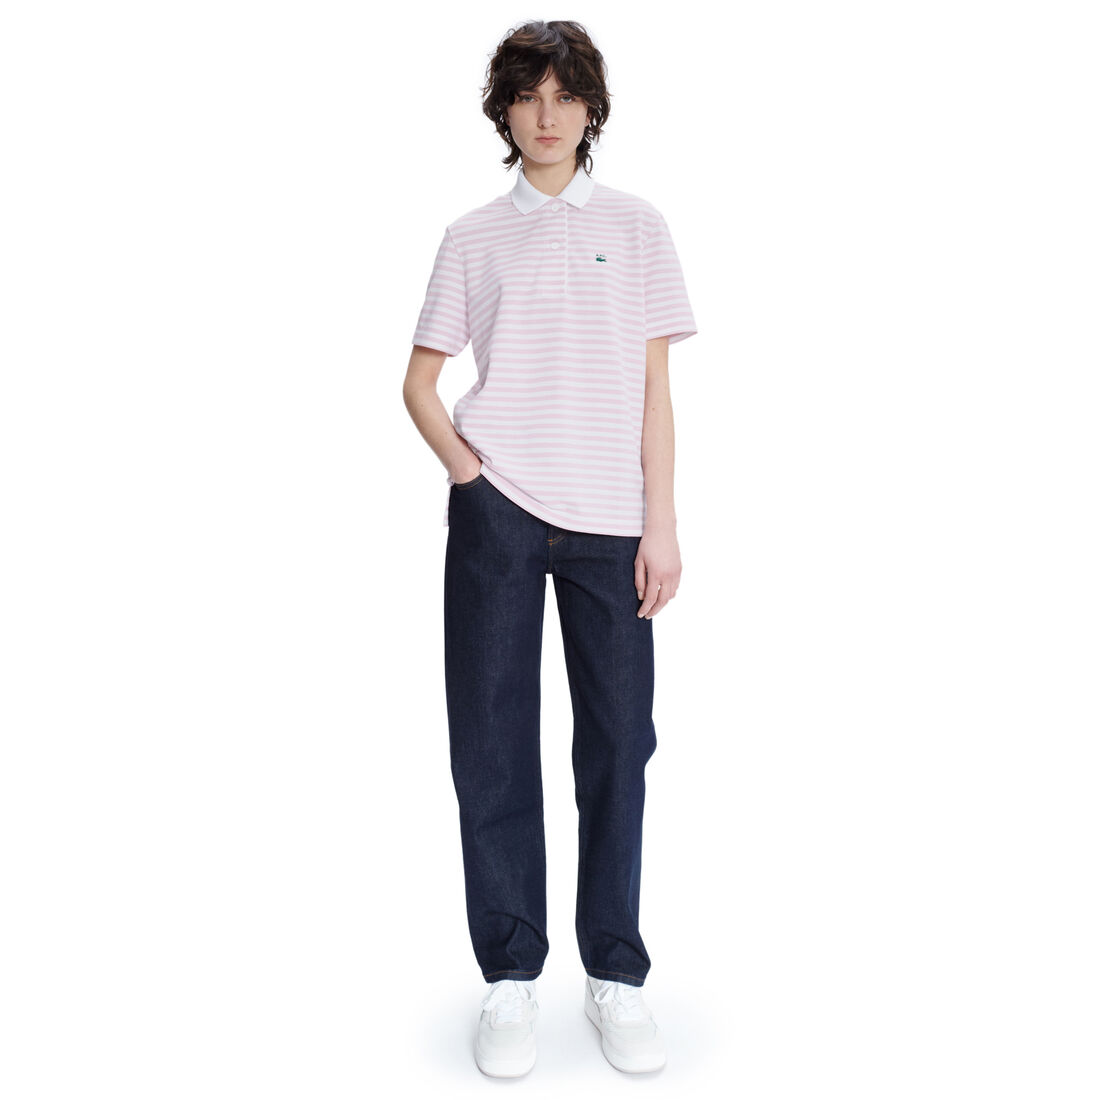 Women’s Lacoste x A.P.C. Loose Fit Striped Polo Shirt